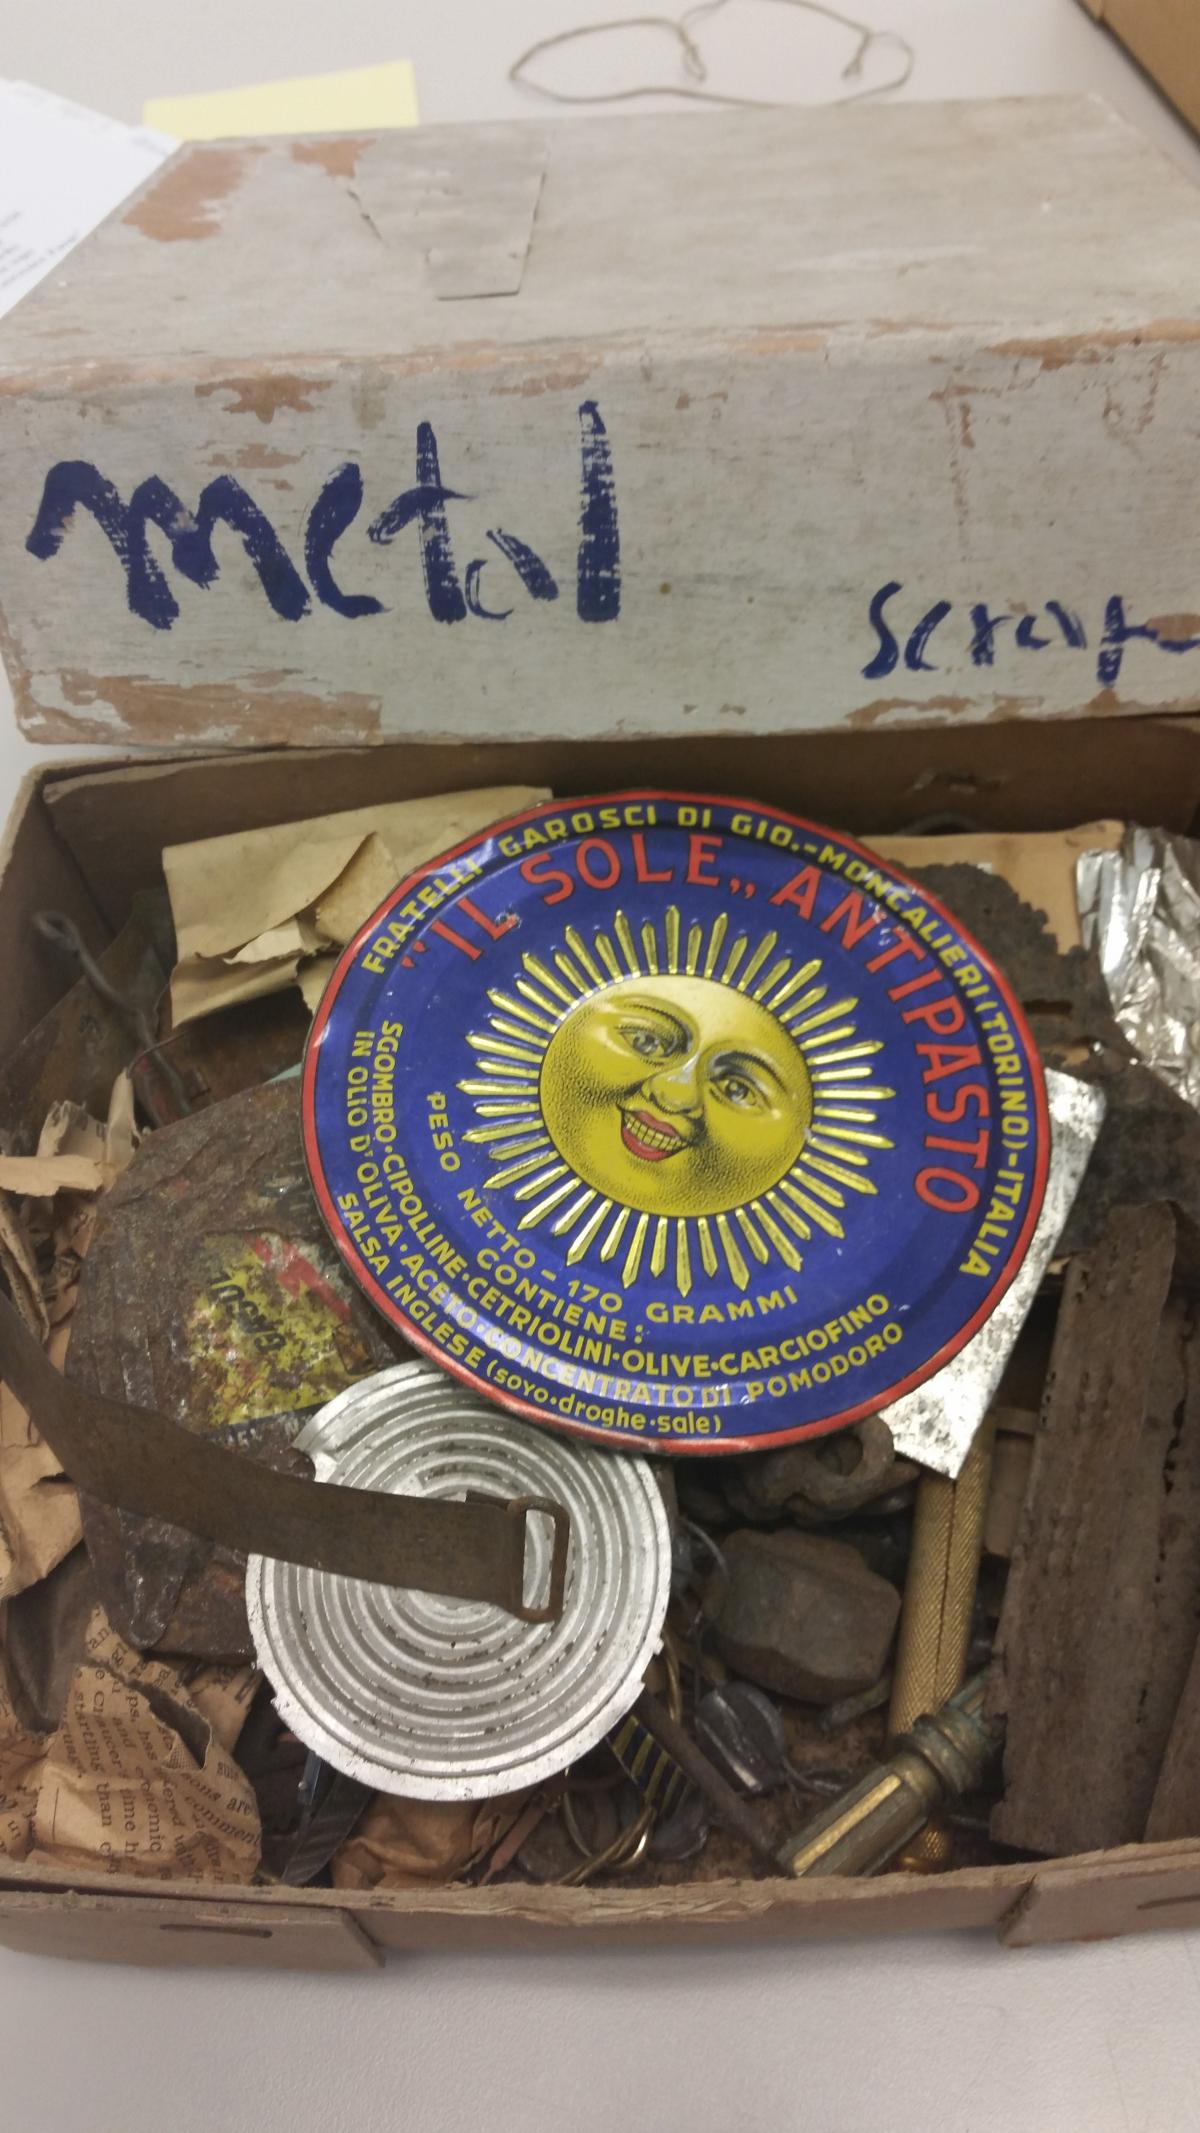 A box marked metal scapes in blue marker opened to an image from a jar of olives featuring a yellow sun; below scraps of metal